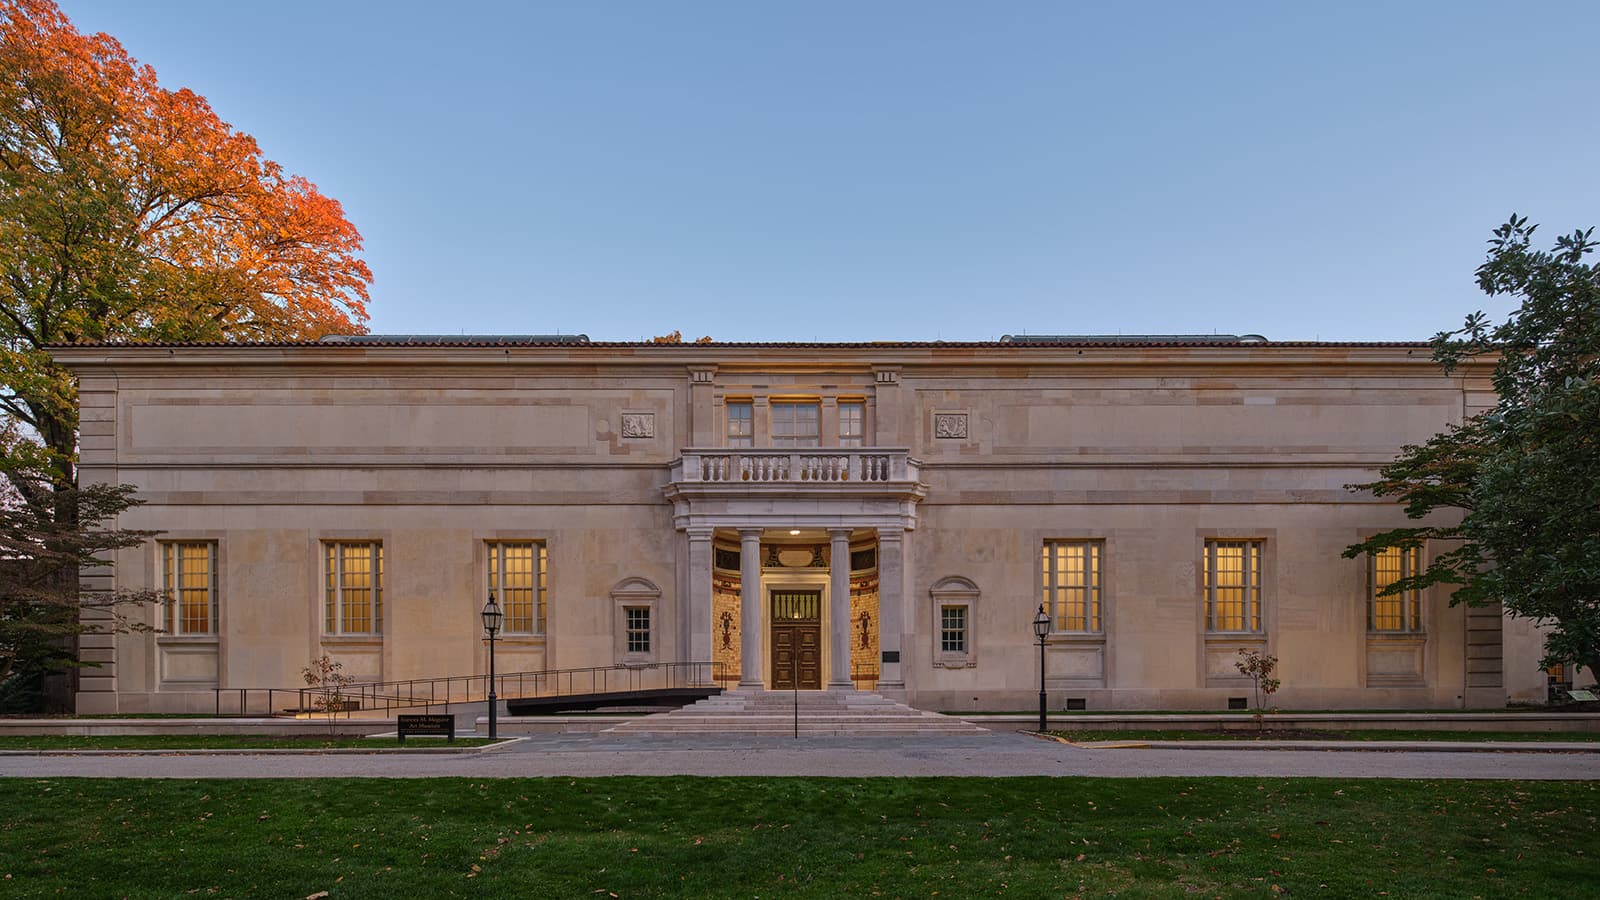 Photo of the Maguire Museum during sunset